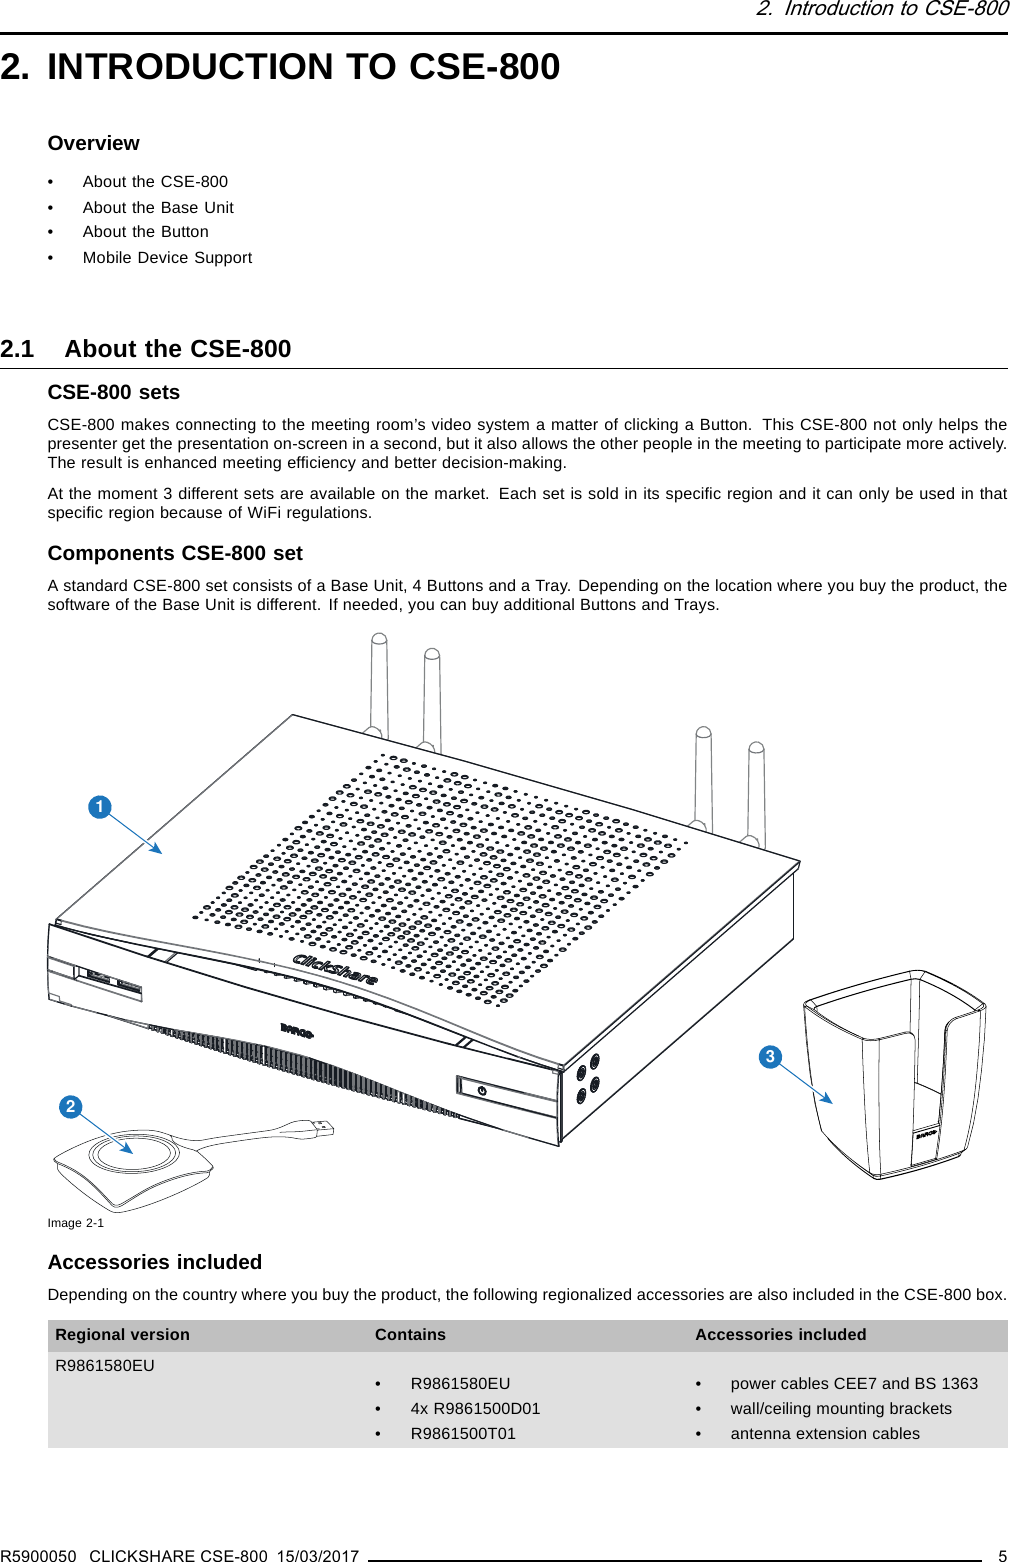 2. Introduction to CSE-8002. INTRODUCTION TO CSE-800Overview• About the CSE-800• About the Base Unit• About the Button• Mobile Device Support2.1 About the CSE-800CSE-800 setsCSE-800 makes connecting to the meeting room’s video system a matter of clicking a Button. This CSE-800 not only helps thepresenter get the presentation on-screen in a second, but it also allows the other people in the meeting to participate more actively.The result is enhanced meeting efﬁciency and better decision-making.At the moment 3 different sets are available on the market. Each set is sold in its speciﬁc region and it can only be used in thatspeciﬁc region because of WiFi regulations.Components CSE-800 setA standard CSE-800 set consists of a Base Unit, 4 Buttons and a Tray. Depending on the location where you buy the product, thesoftware of the Base Unit is different. If needed, you can buy additional Buttons and Trays.213Image 2-1Accessories includedDepending on the country where you buy the product, the following regionalized accessories are also included in the CSE-800 box.Regional version Contains Accessories includedR9861580EU • R9861580EU• 4x R9861500D01• R9861500T01• power cables CEE7 and BS 1363• wall/ceiling mounting brackets• antenna extension cablesR5900050 CLICKSHARE CSE-800 15/03/2017 5